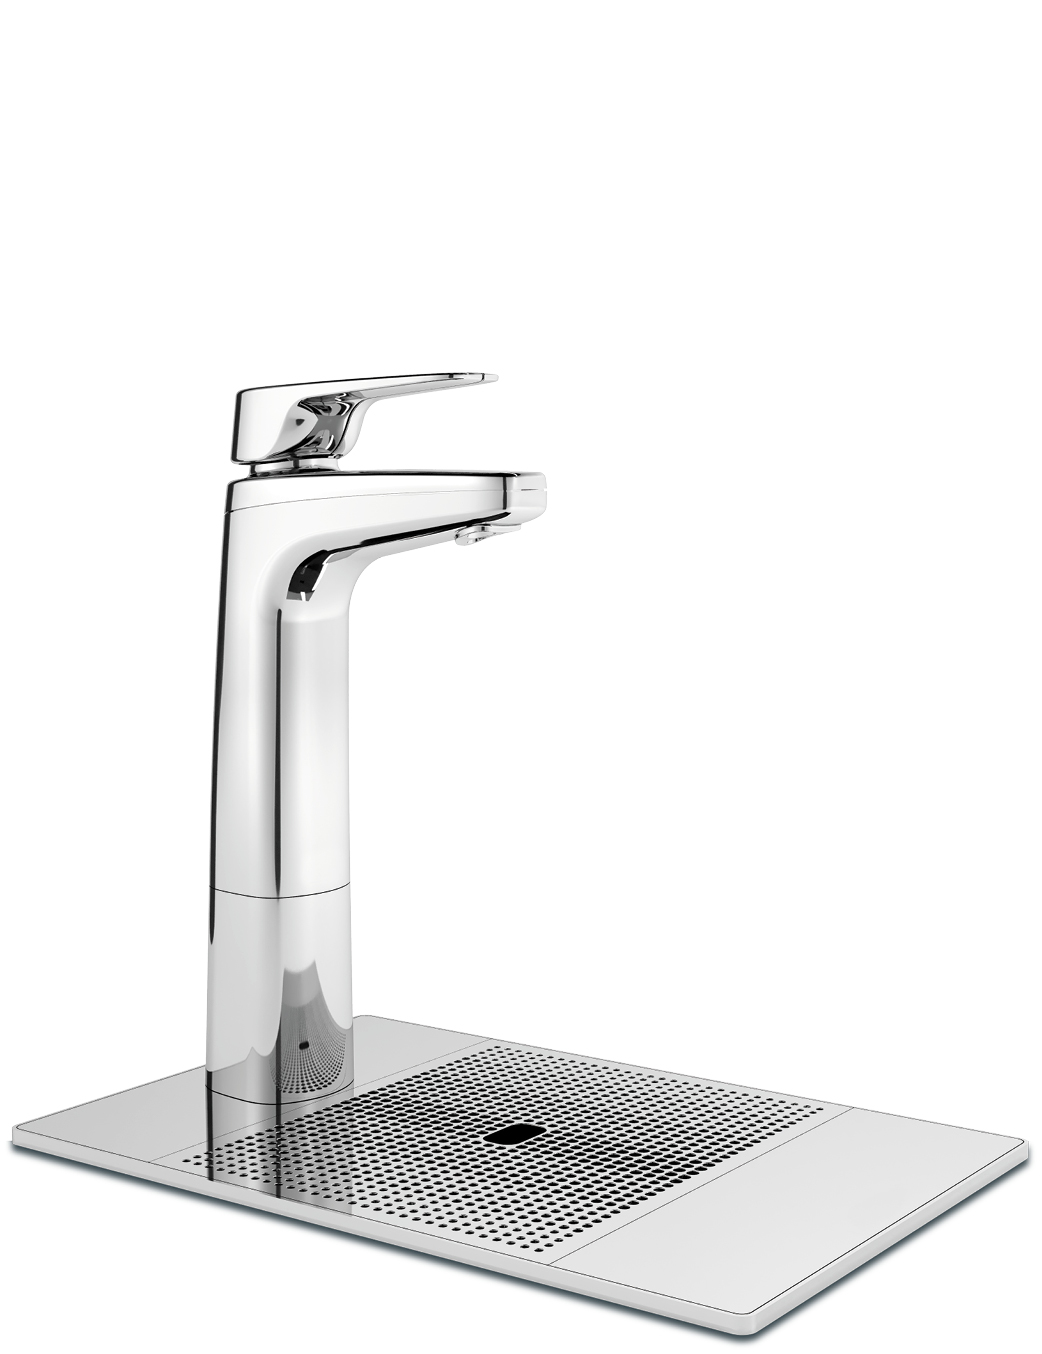 Billi XL Levered tap with font